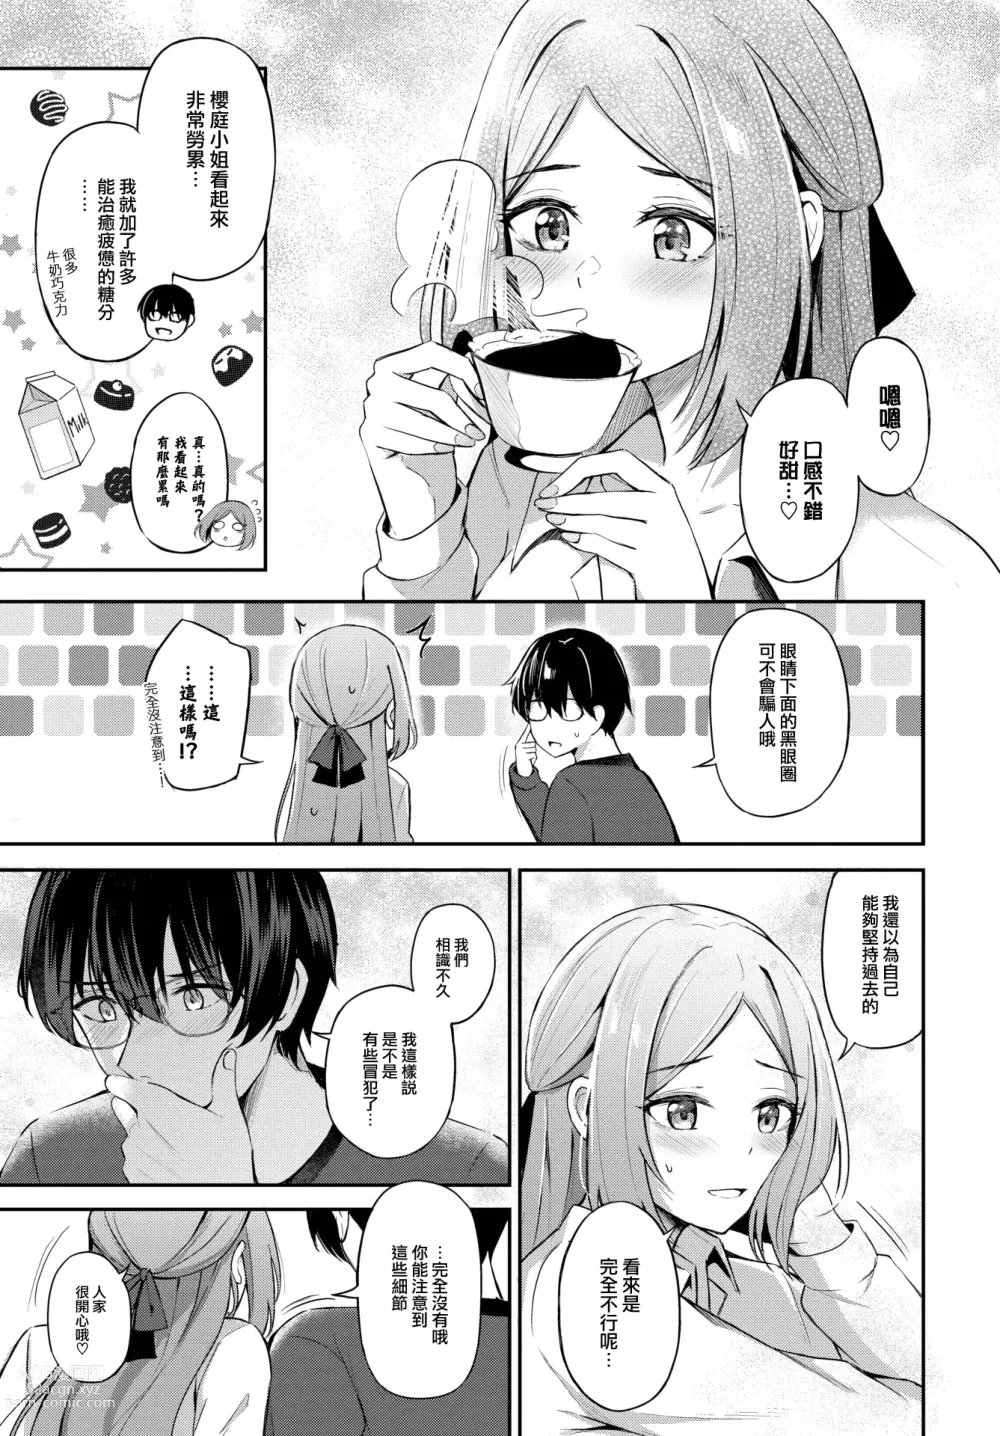 Page 6 of manga Nigakute Amai Coffee no you ni - Its fragrance is very special...